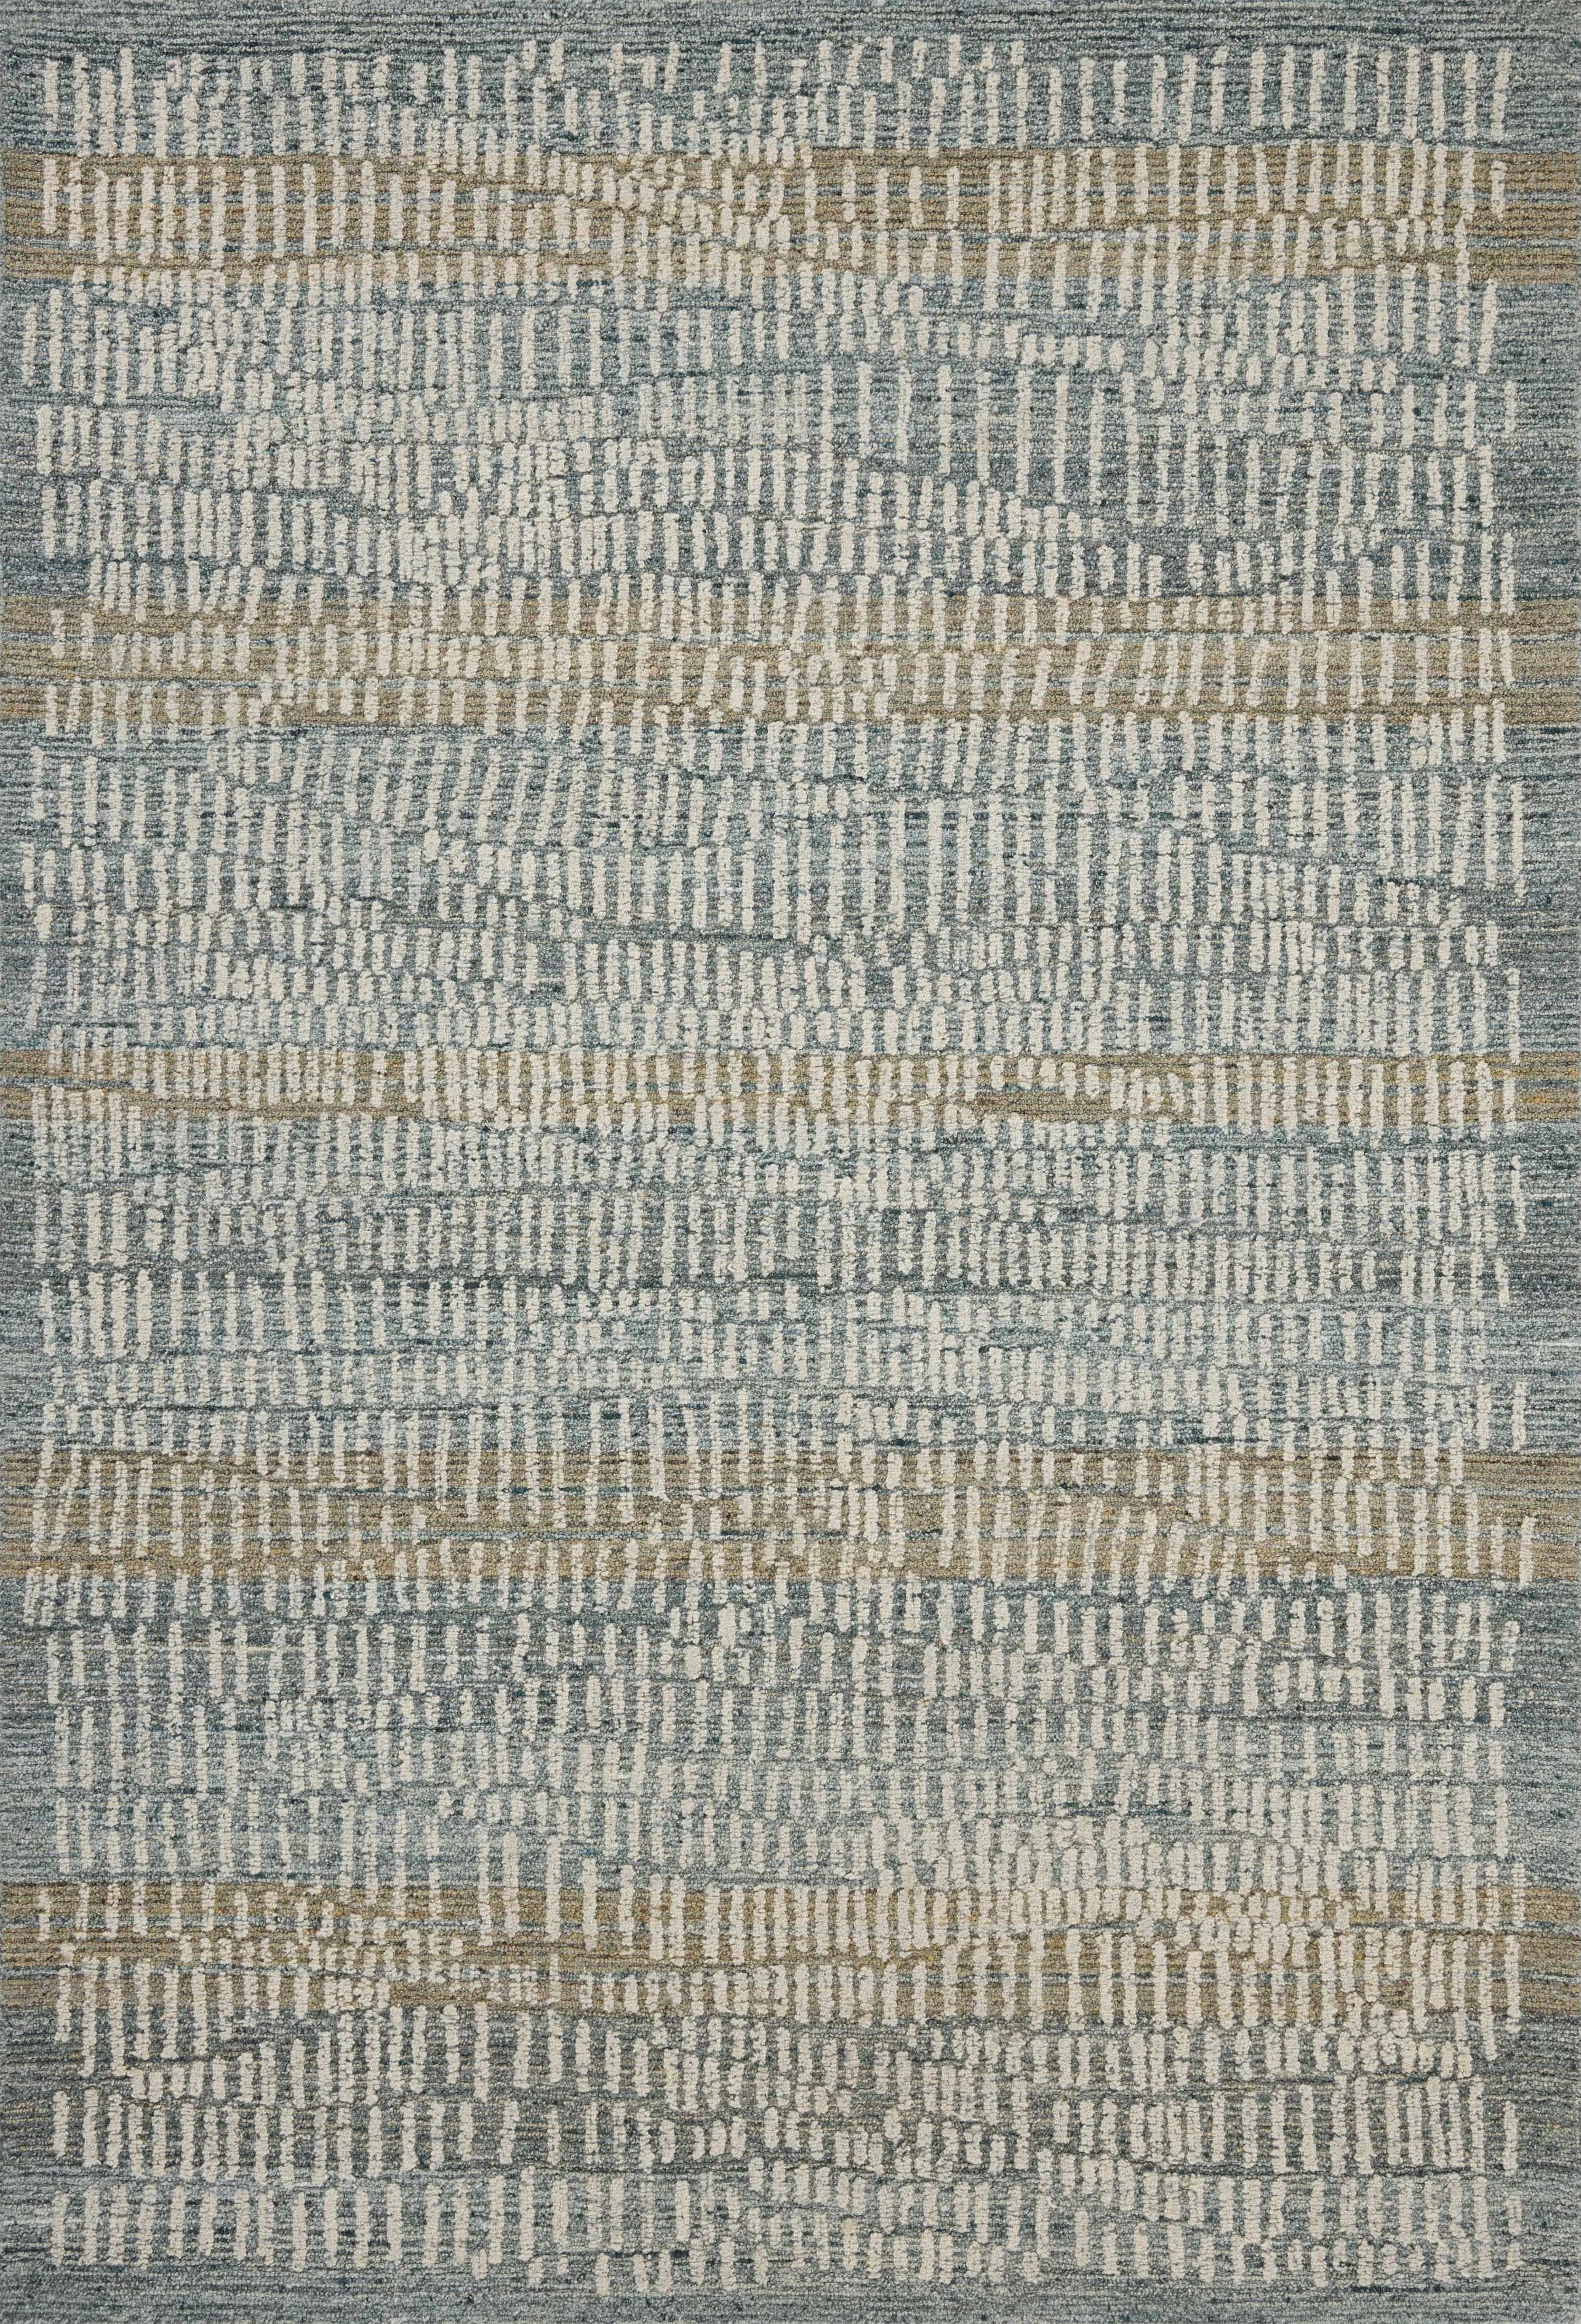 The Elias Ocean / Oatmeal Rug is a hand-tufted wool area rug with lively graphic patterns in earth and stone tones. There’s a unique texture to the rug made by over-tufting, in which a design is hand-tufted over a tufted base, creating a subtle high-low pile. Amethyst Home provides interior design, new home construction design consulting, vintage area rugs, and lighting in the Miami metro area.